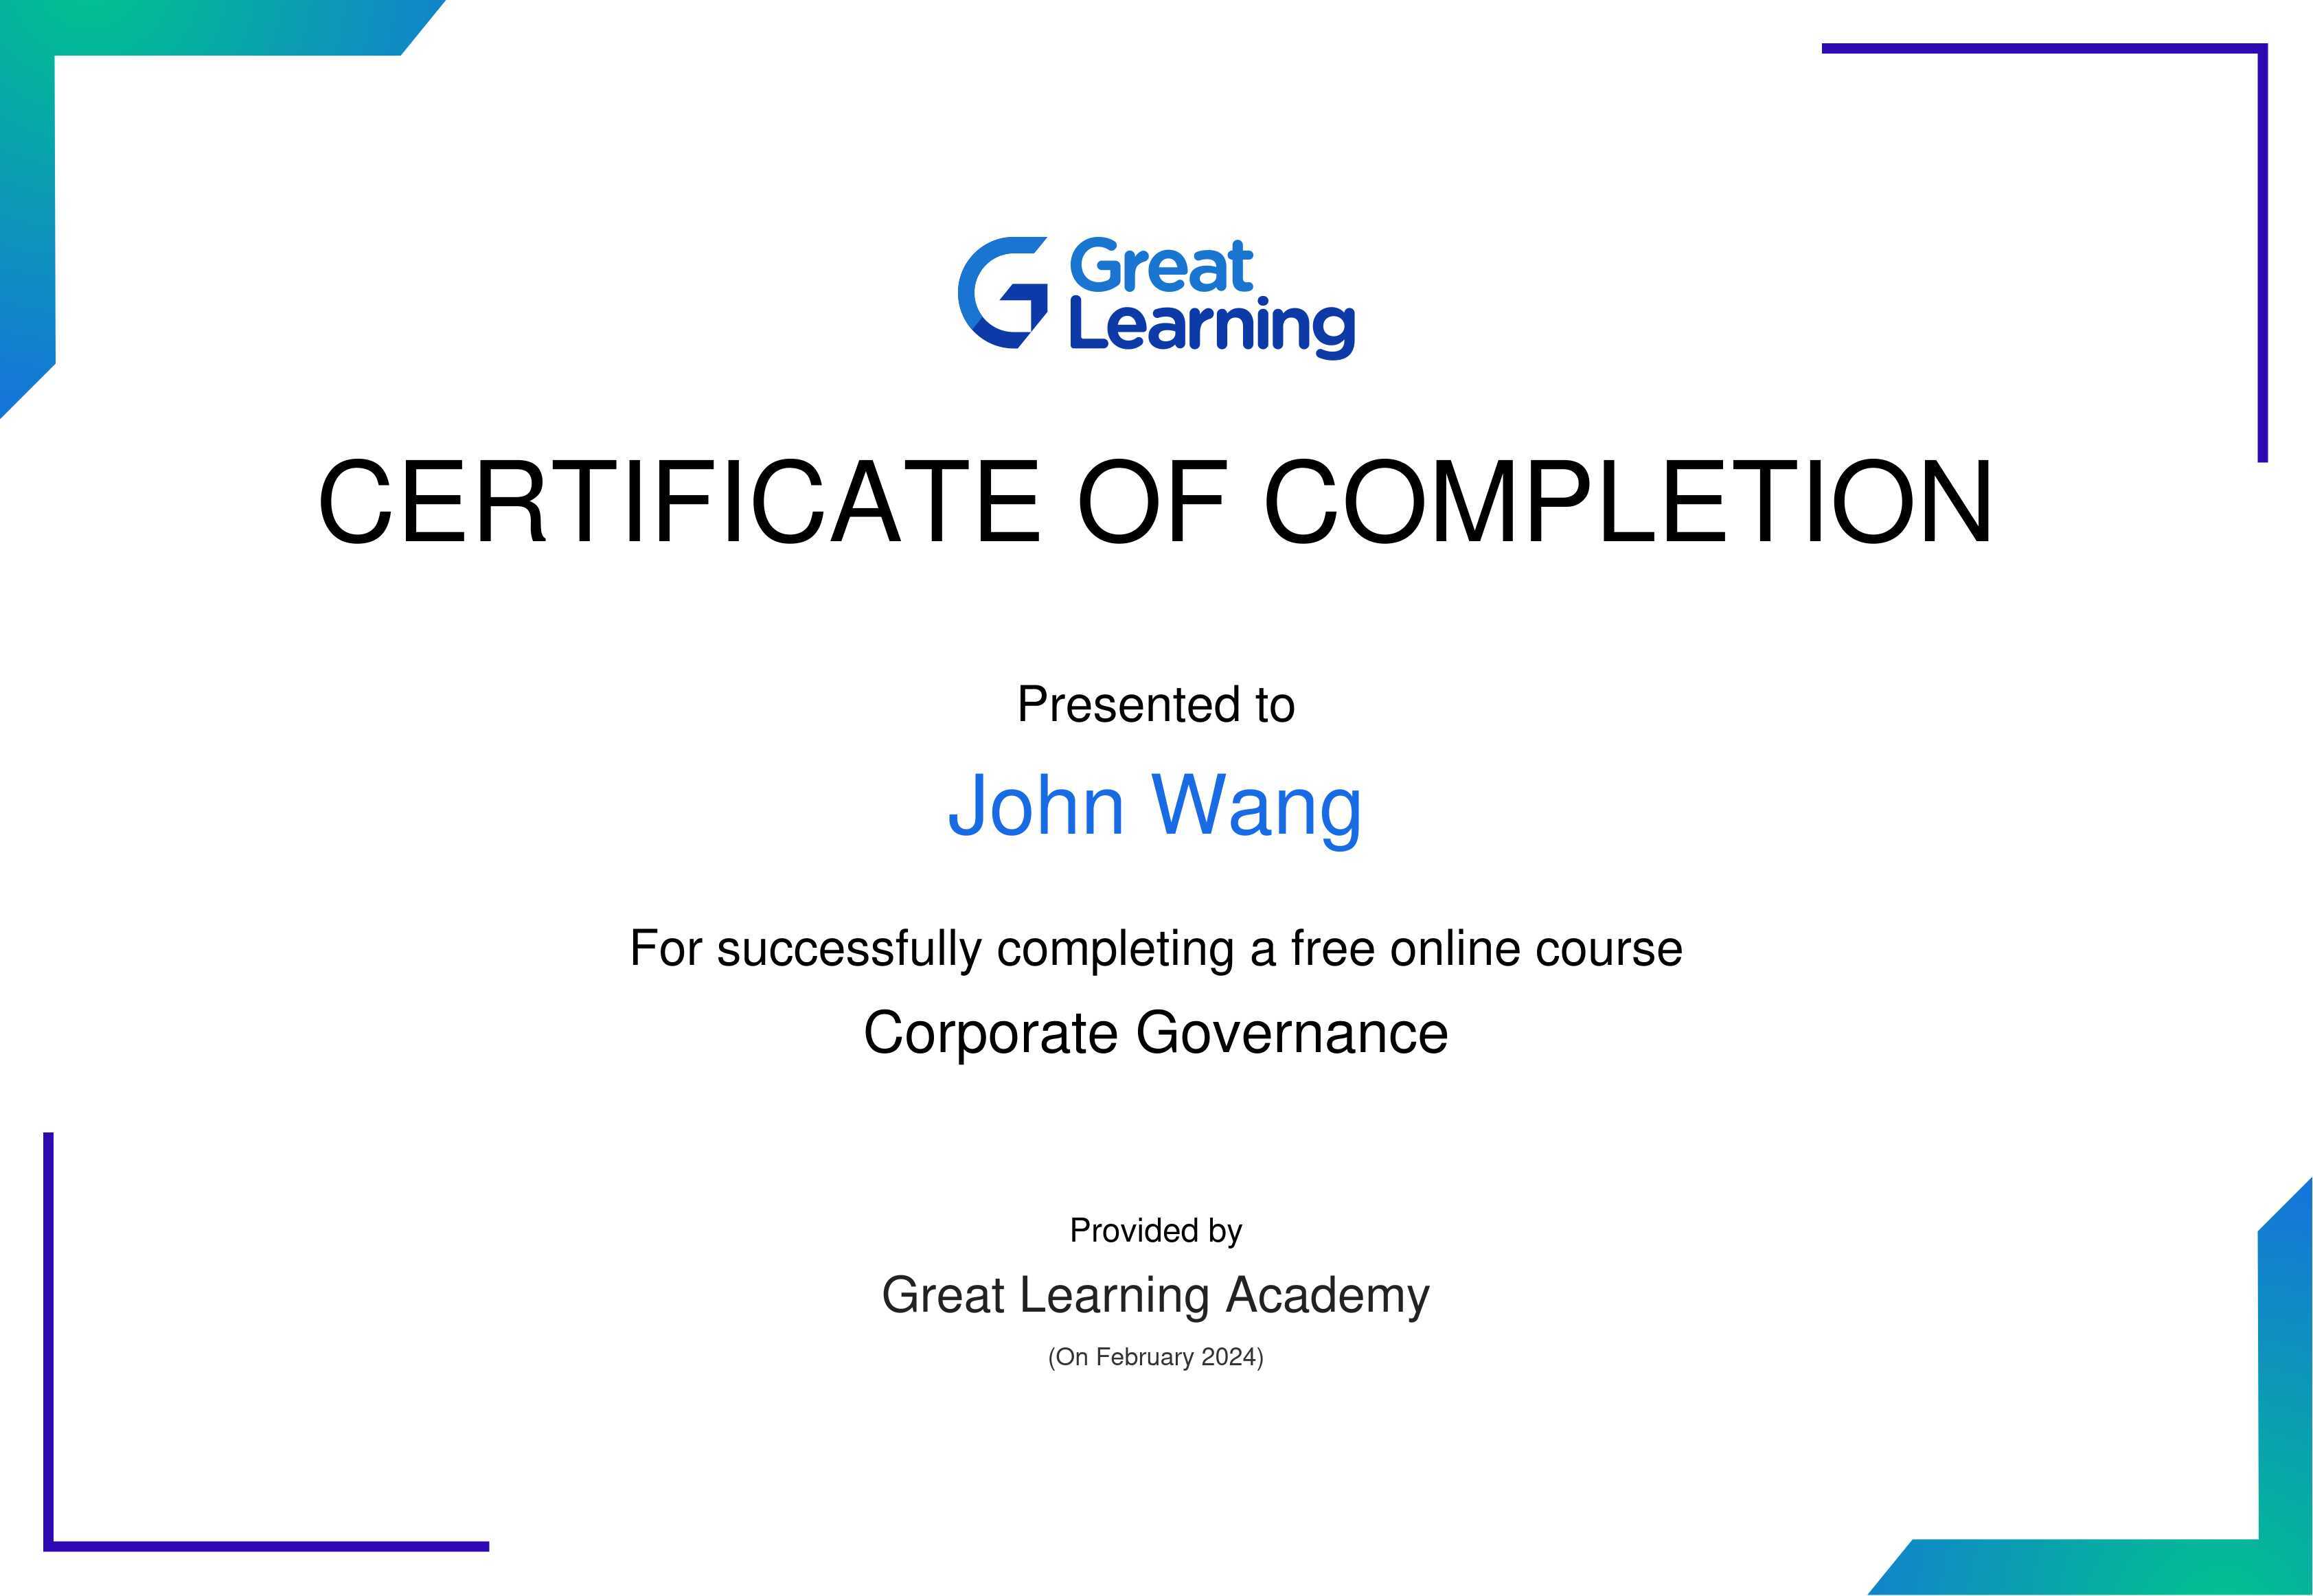 John's Corporate Governance from Great Learning Academy by Jeevan Sasidharan